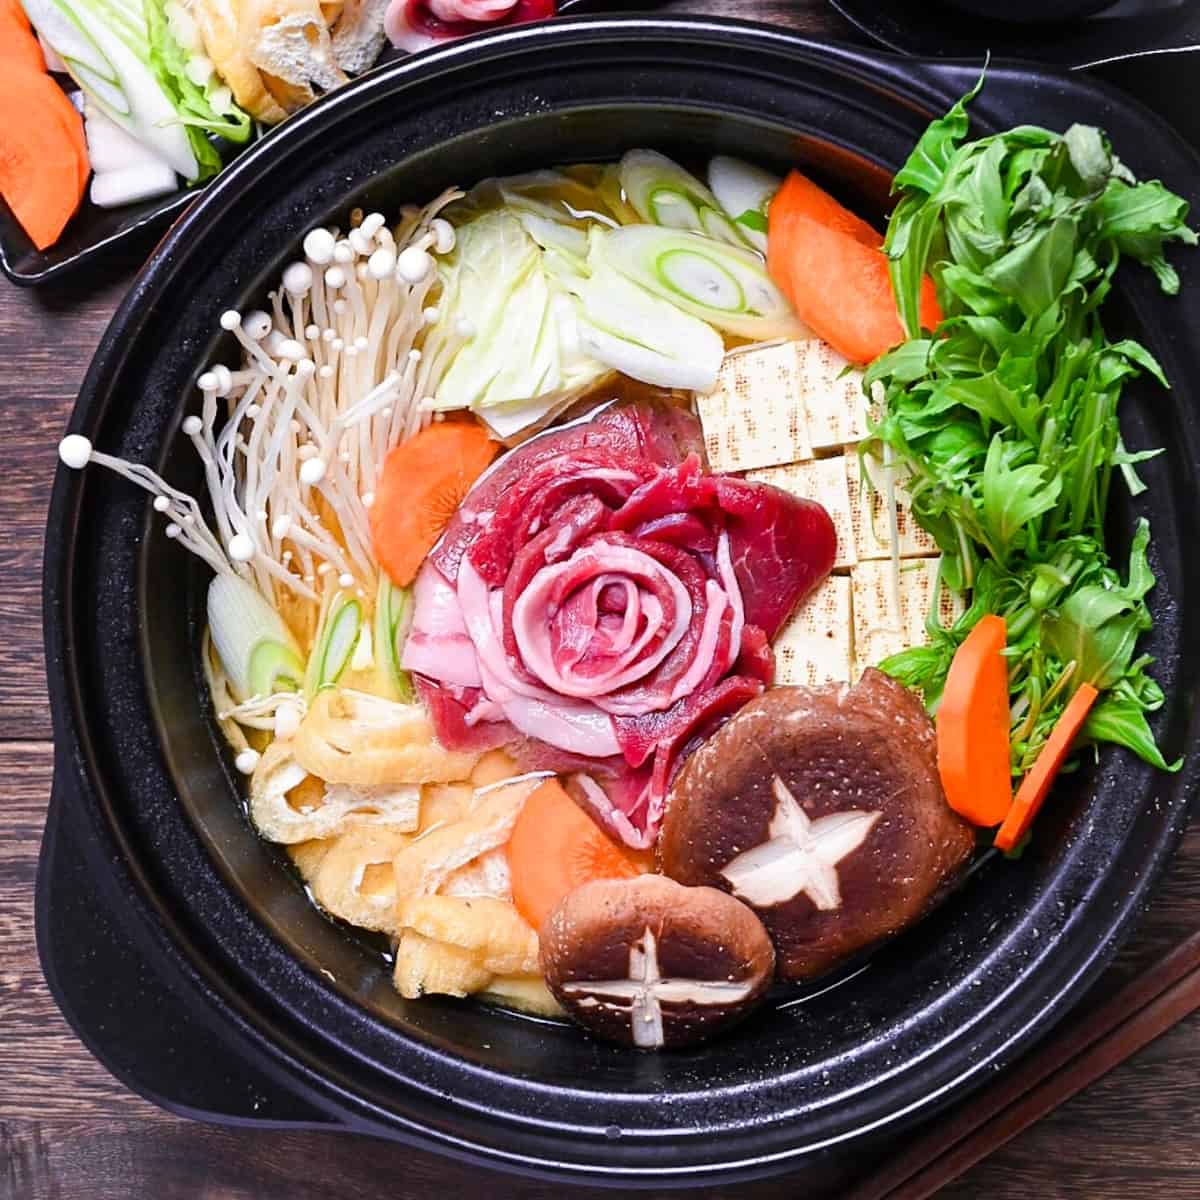 Botan nabe served in a black hot pot and made with wild boar shaped like a peony flower